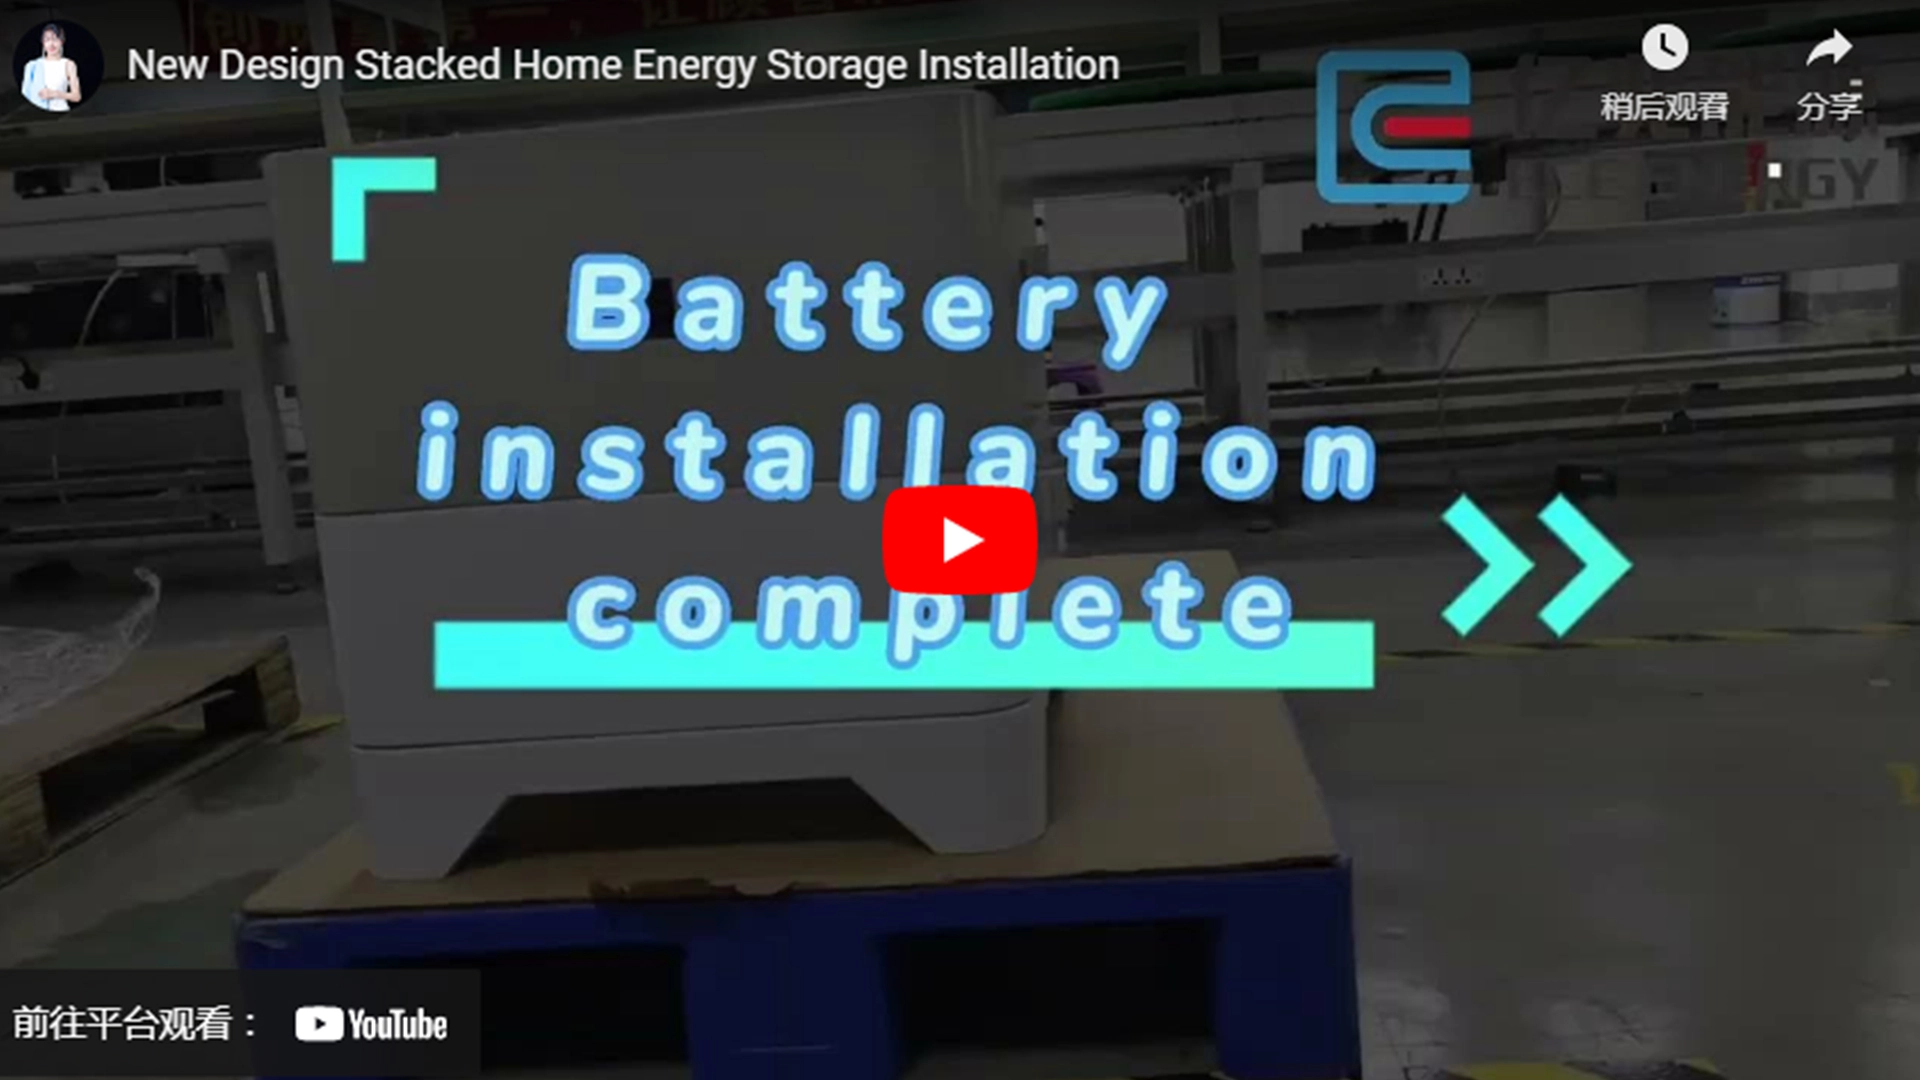 New Design Stacked Home Energy Storage Installation